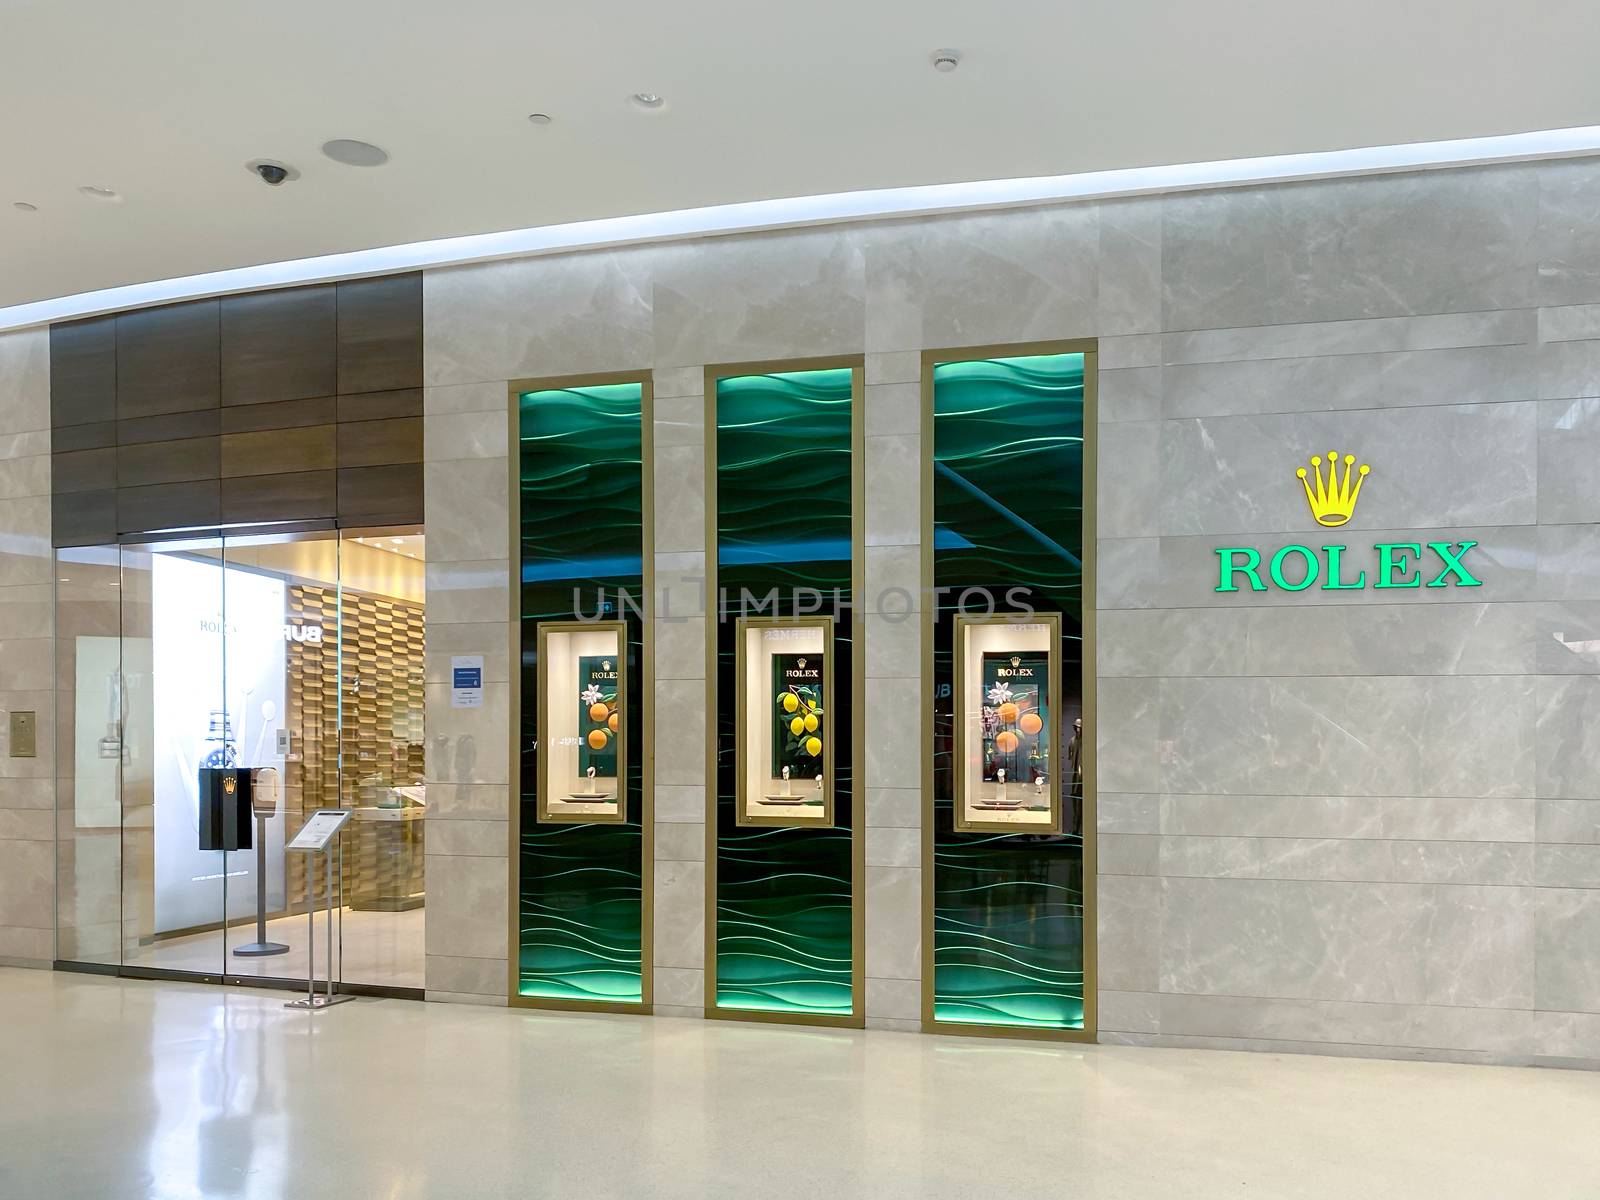 Rolex storefront at Central Embassy, Bangkok with pandemic influenza precautions procedure during Covid-19 situation. Rolex is a Swiss luxury watch manufacturer.